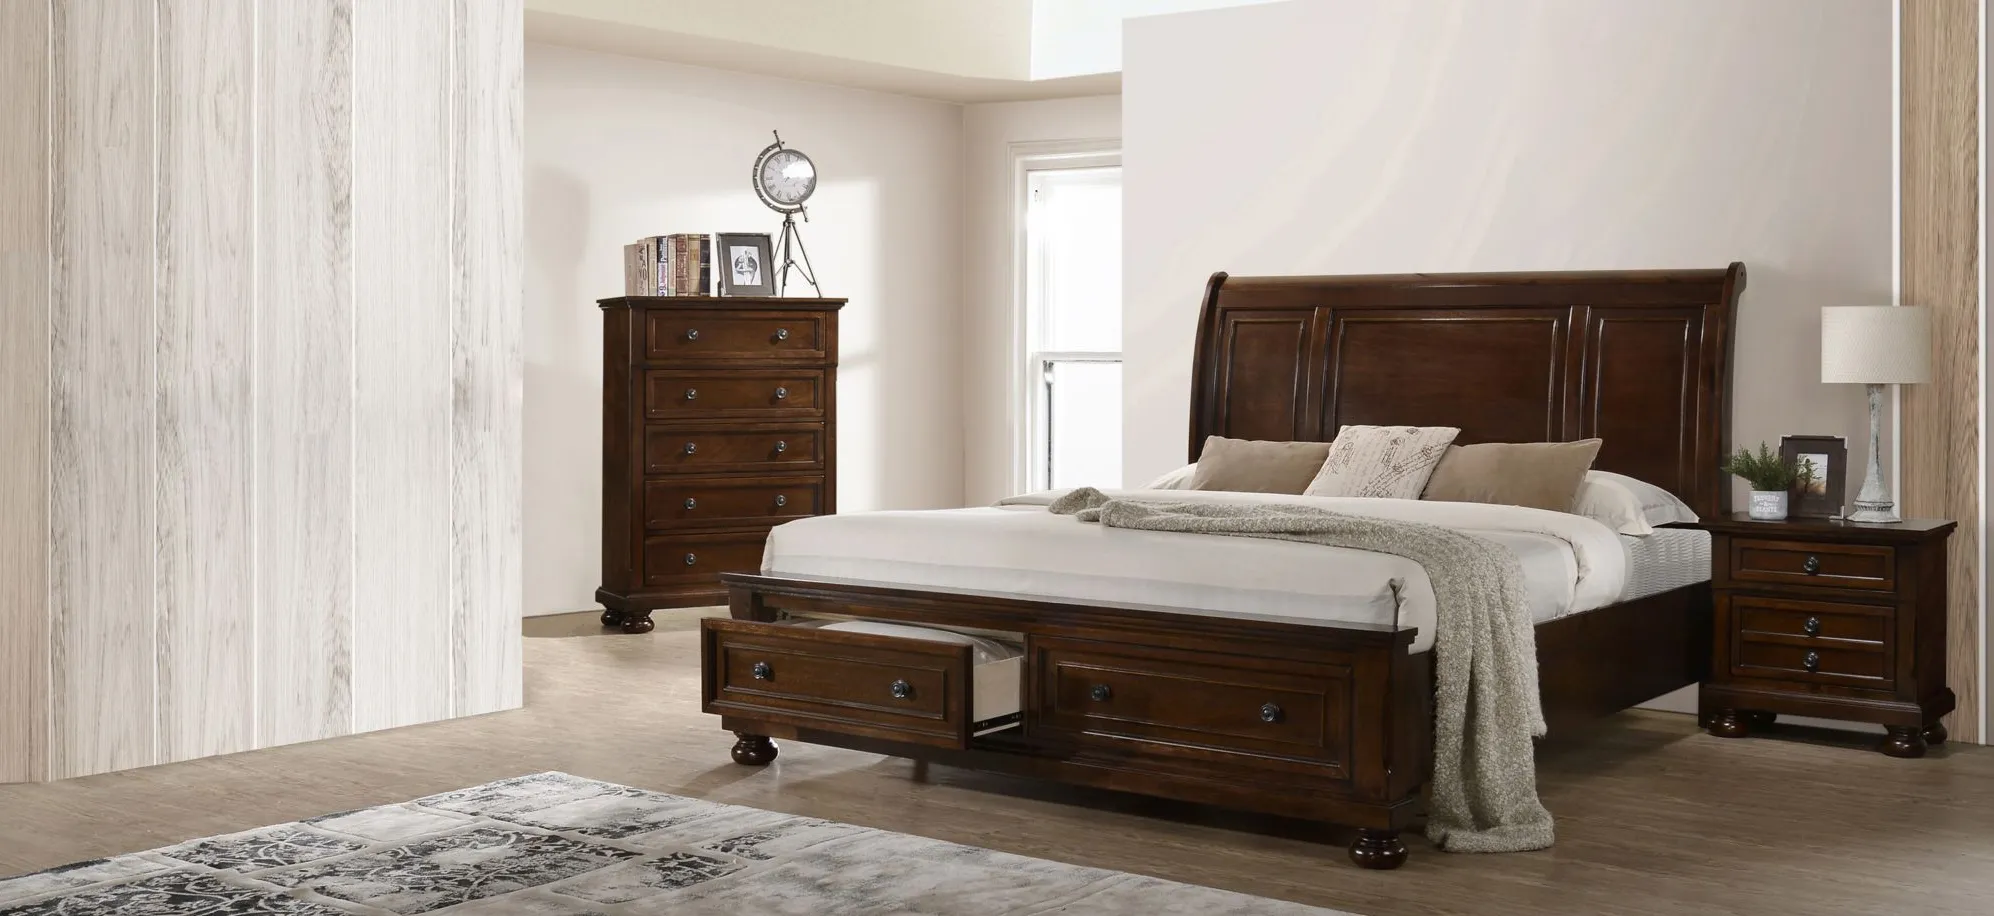 Meade 3-pc. Sleigh Storage Bedroom Set in Cherry by Glory Furniture